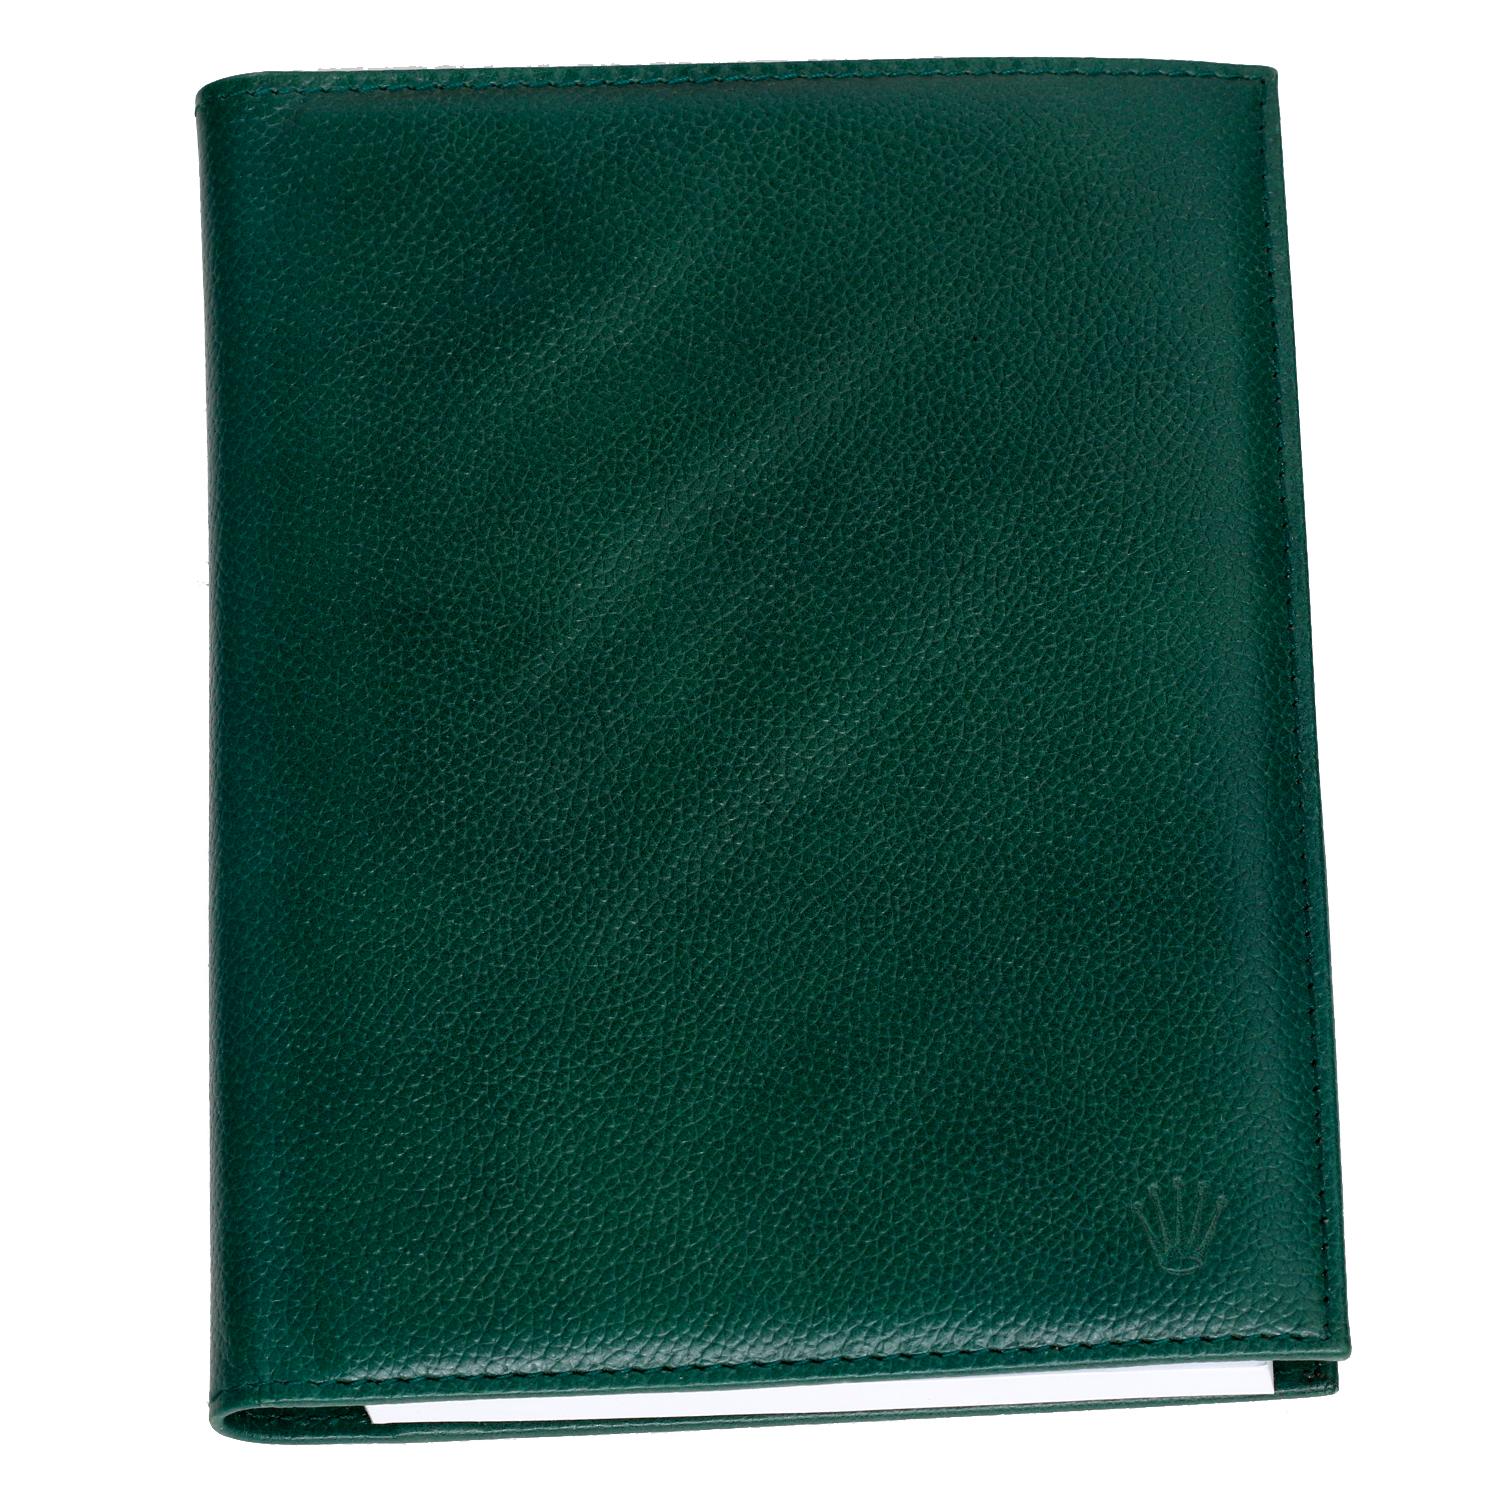 Rolex Green Leather Notepad with Two tone Rolex pen  - Brand new Rolex notepad with beautiful Silver and gold pen with blue ink. Measures 8 x 5.5 inches.